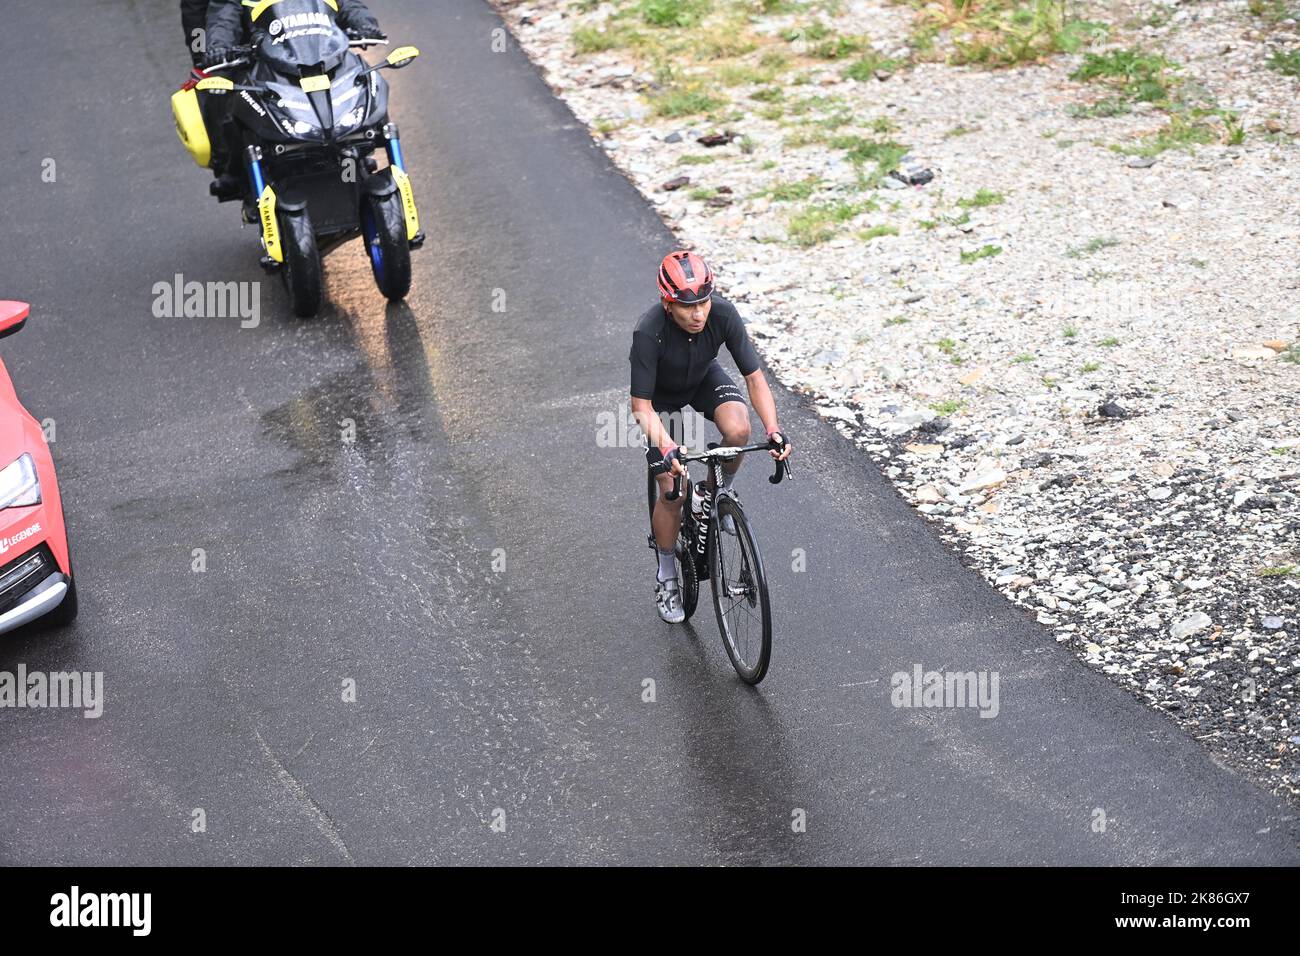 QUINTANA Nairo (COL) of TEAM ARKEA - SAMSIC during stage 9 of the Tour de France 2021, Cluses to Tigne. Stock Photo